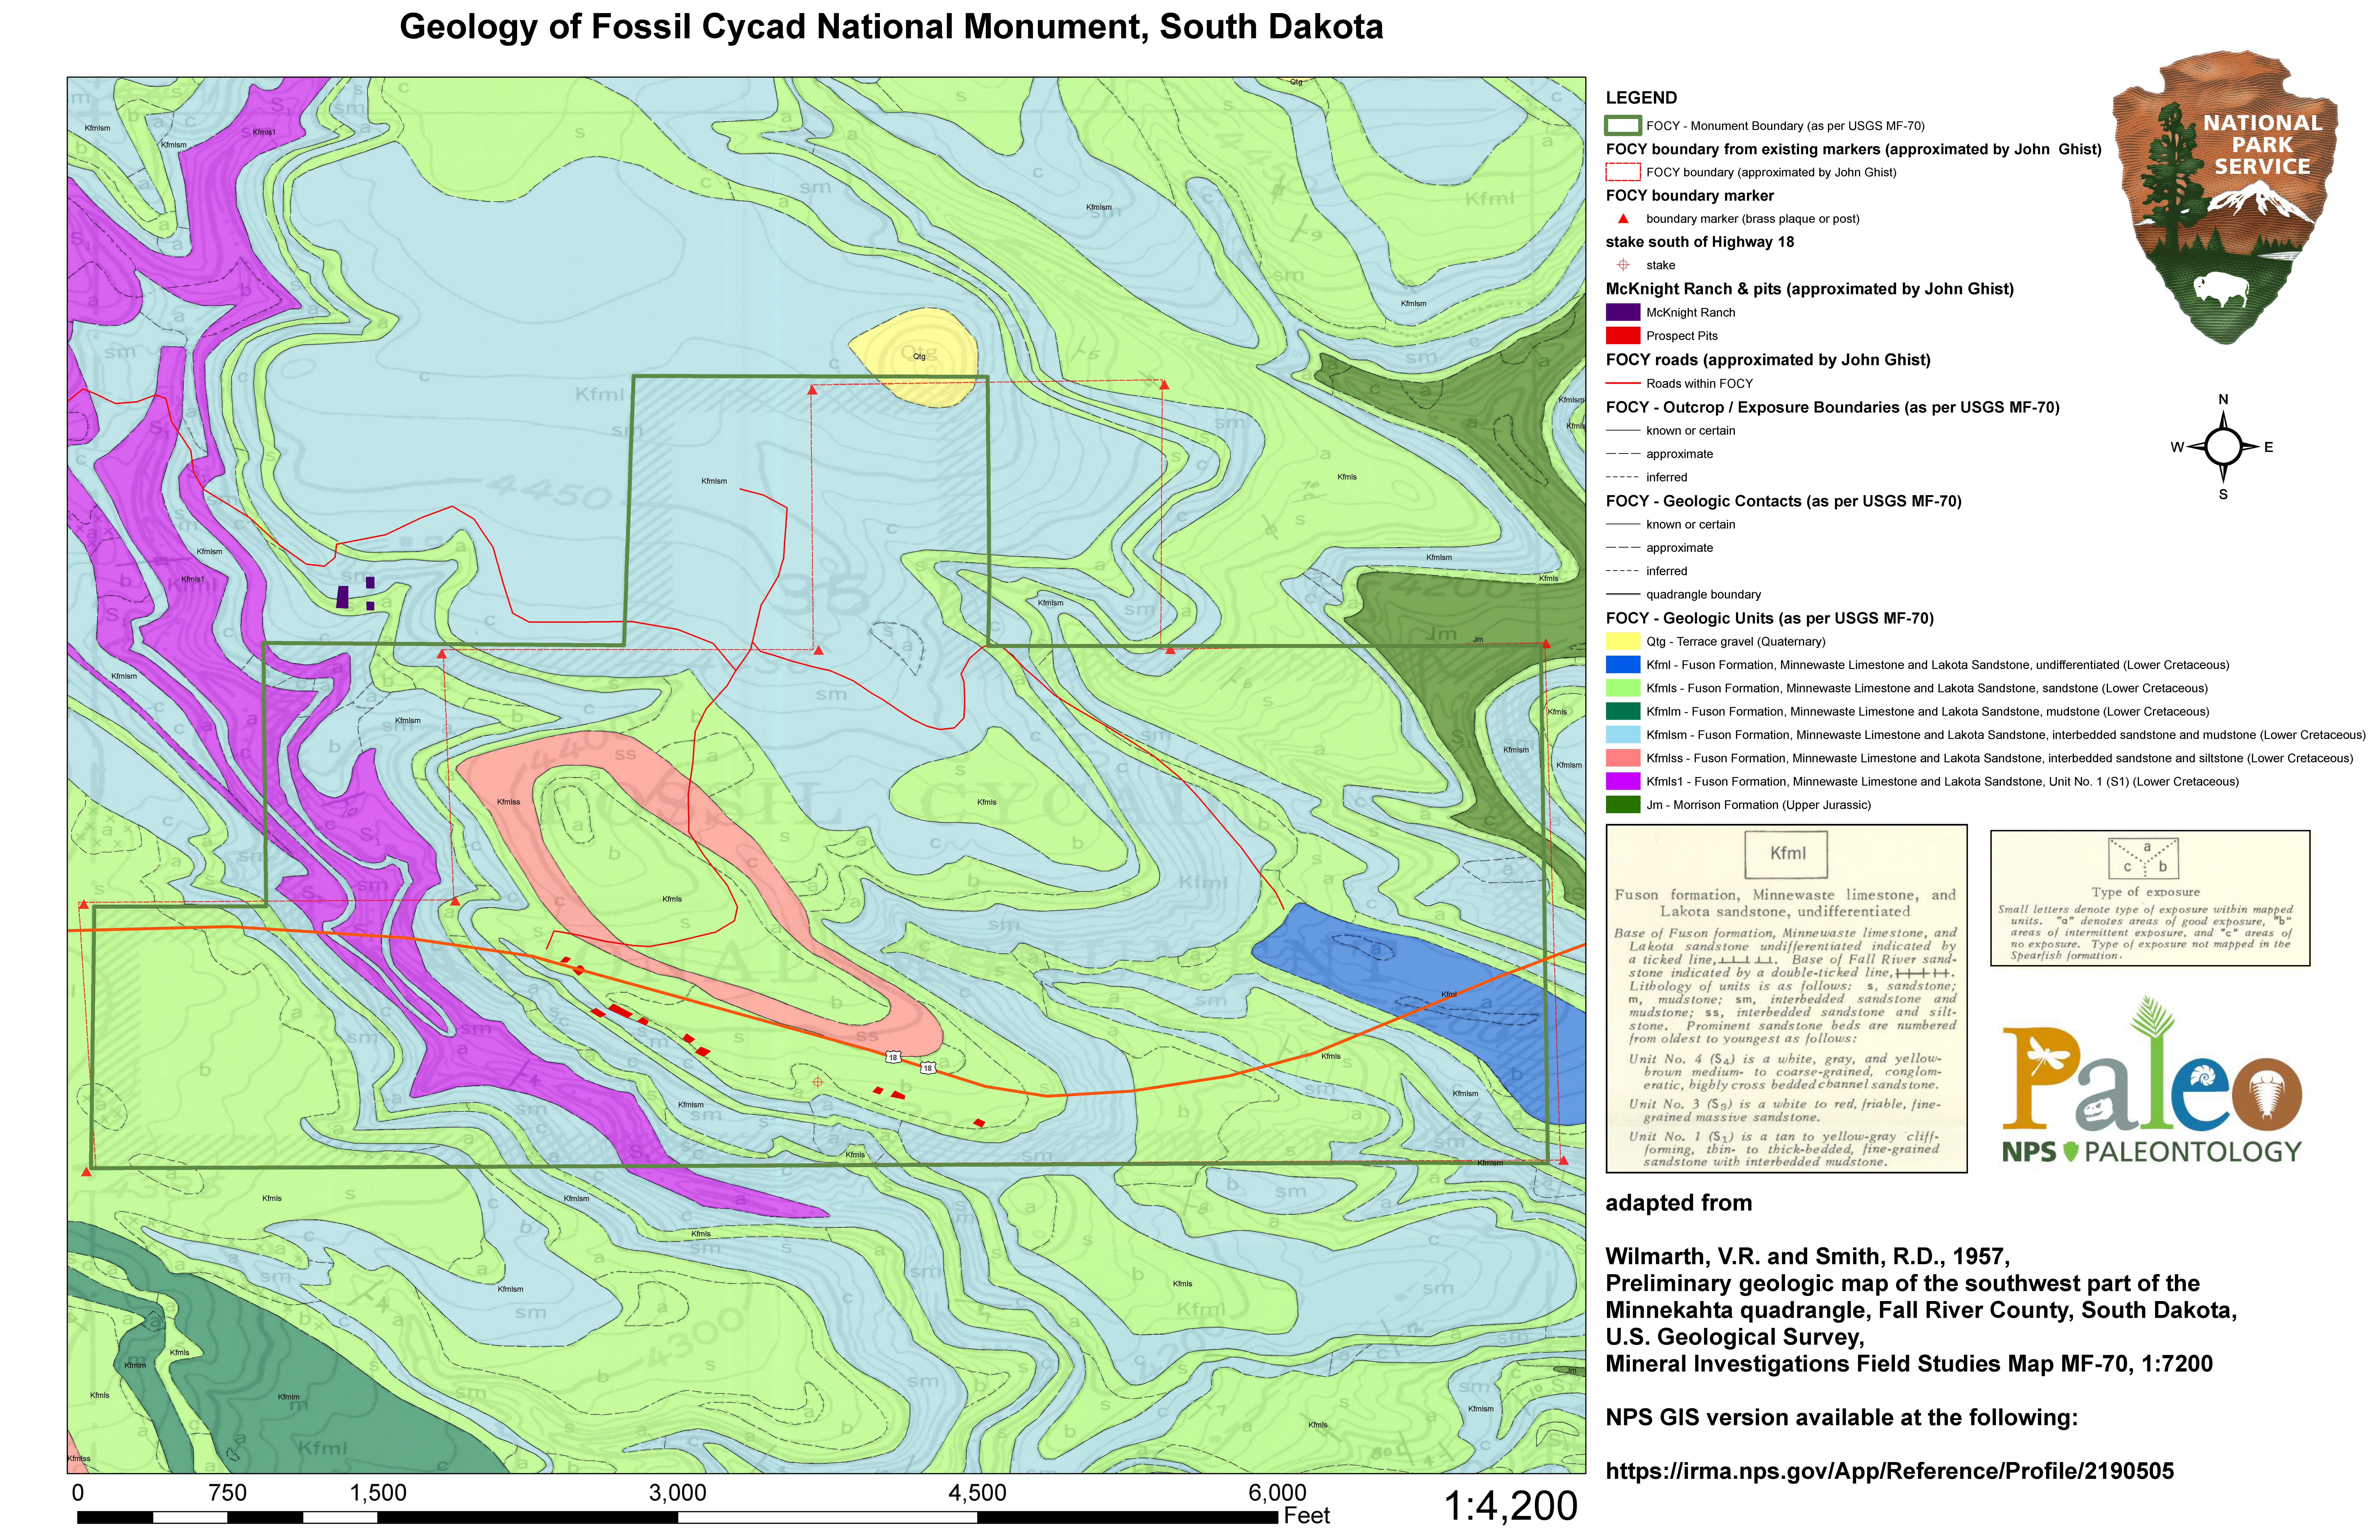 Geologic map of the area of Fossil Cycad National Monument. Map includes legend with map units and scale.